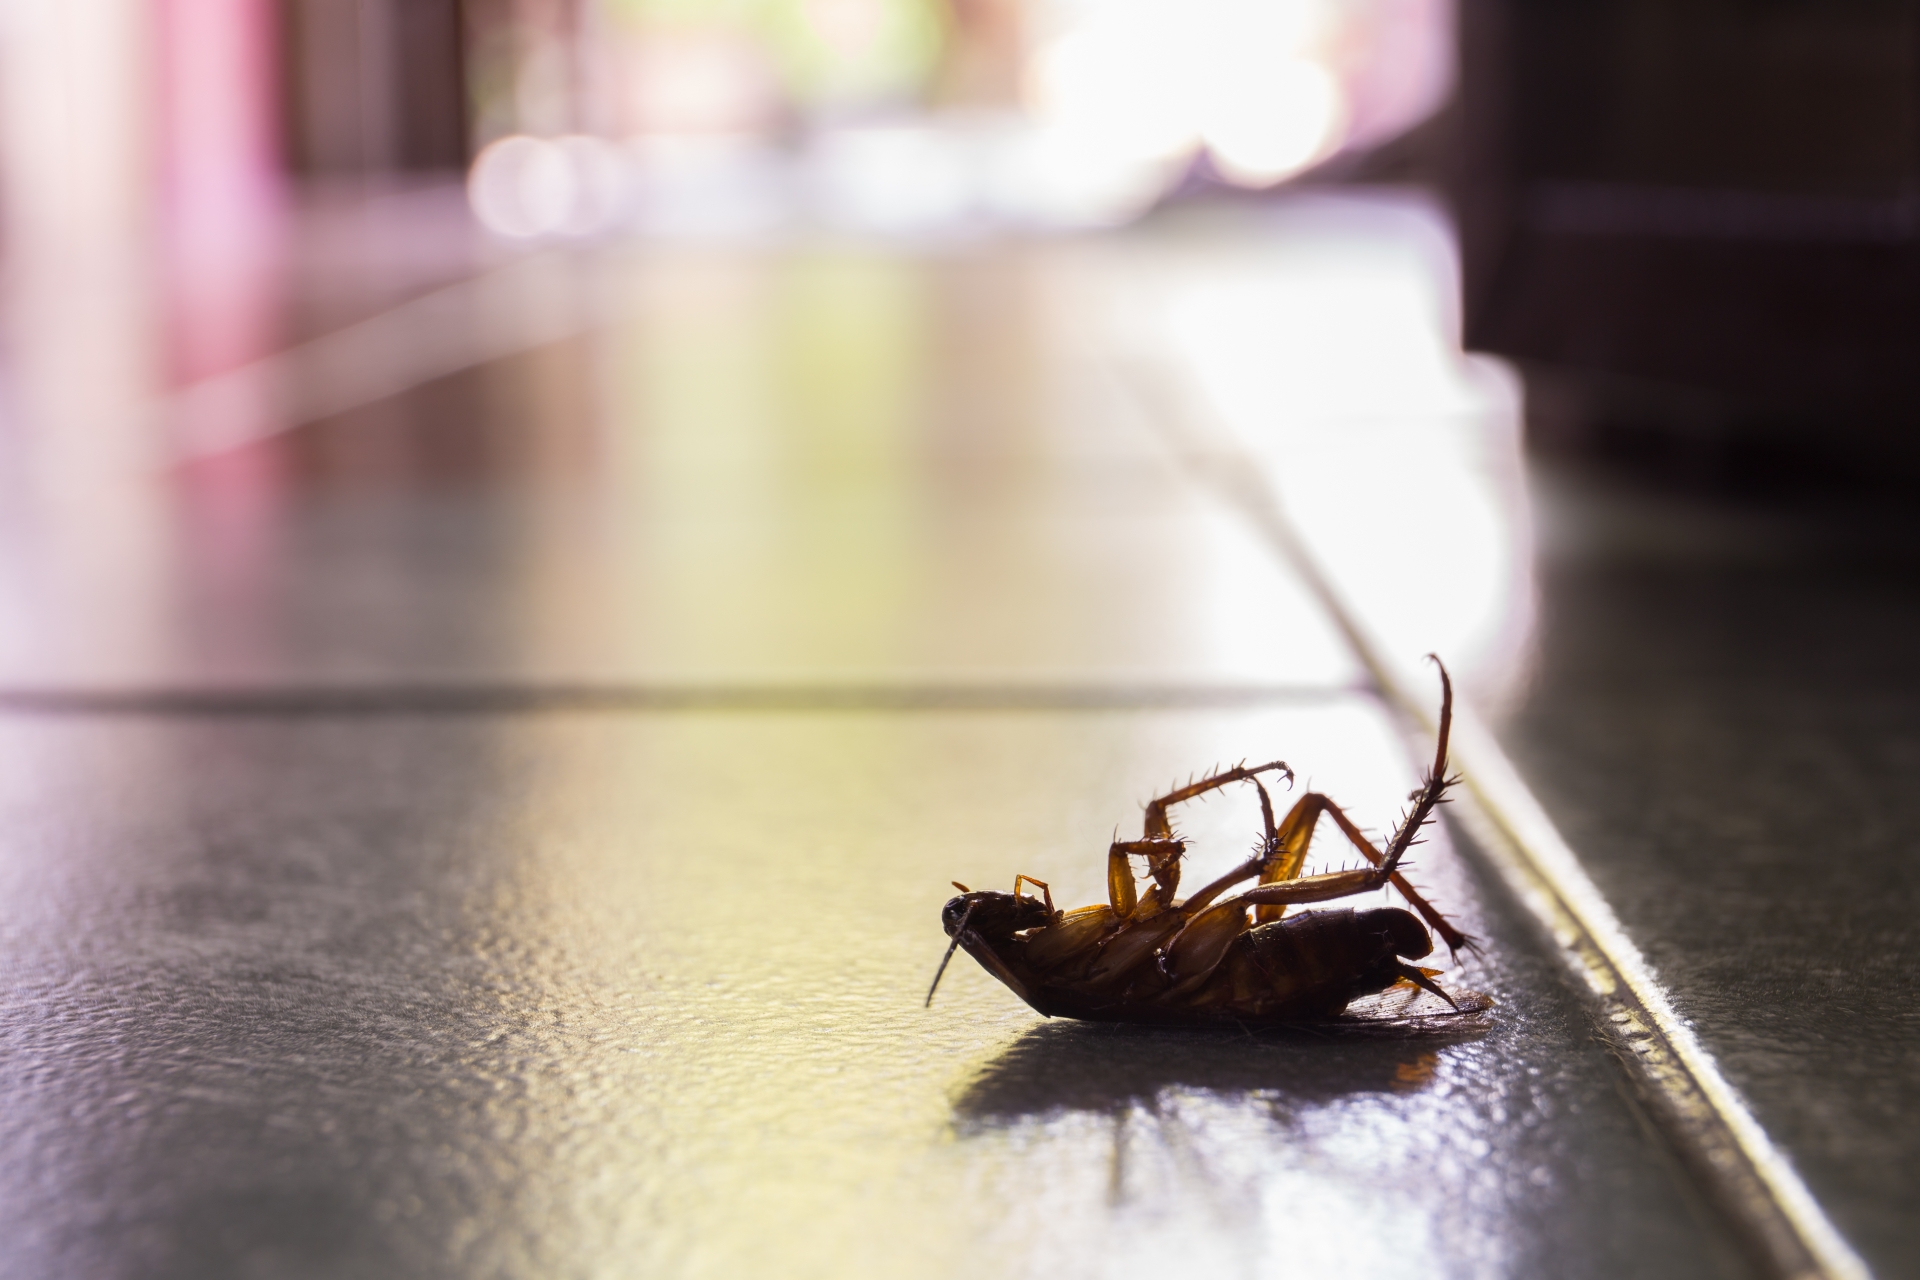 Cockroach Control, Pest Control in Isleworth, TW7. Call Now 020 8166 9746